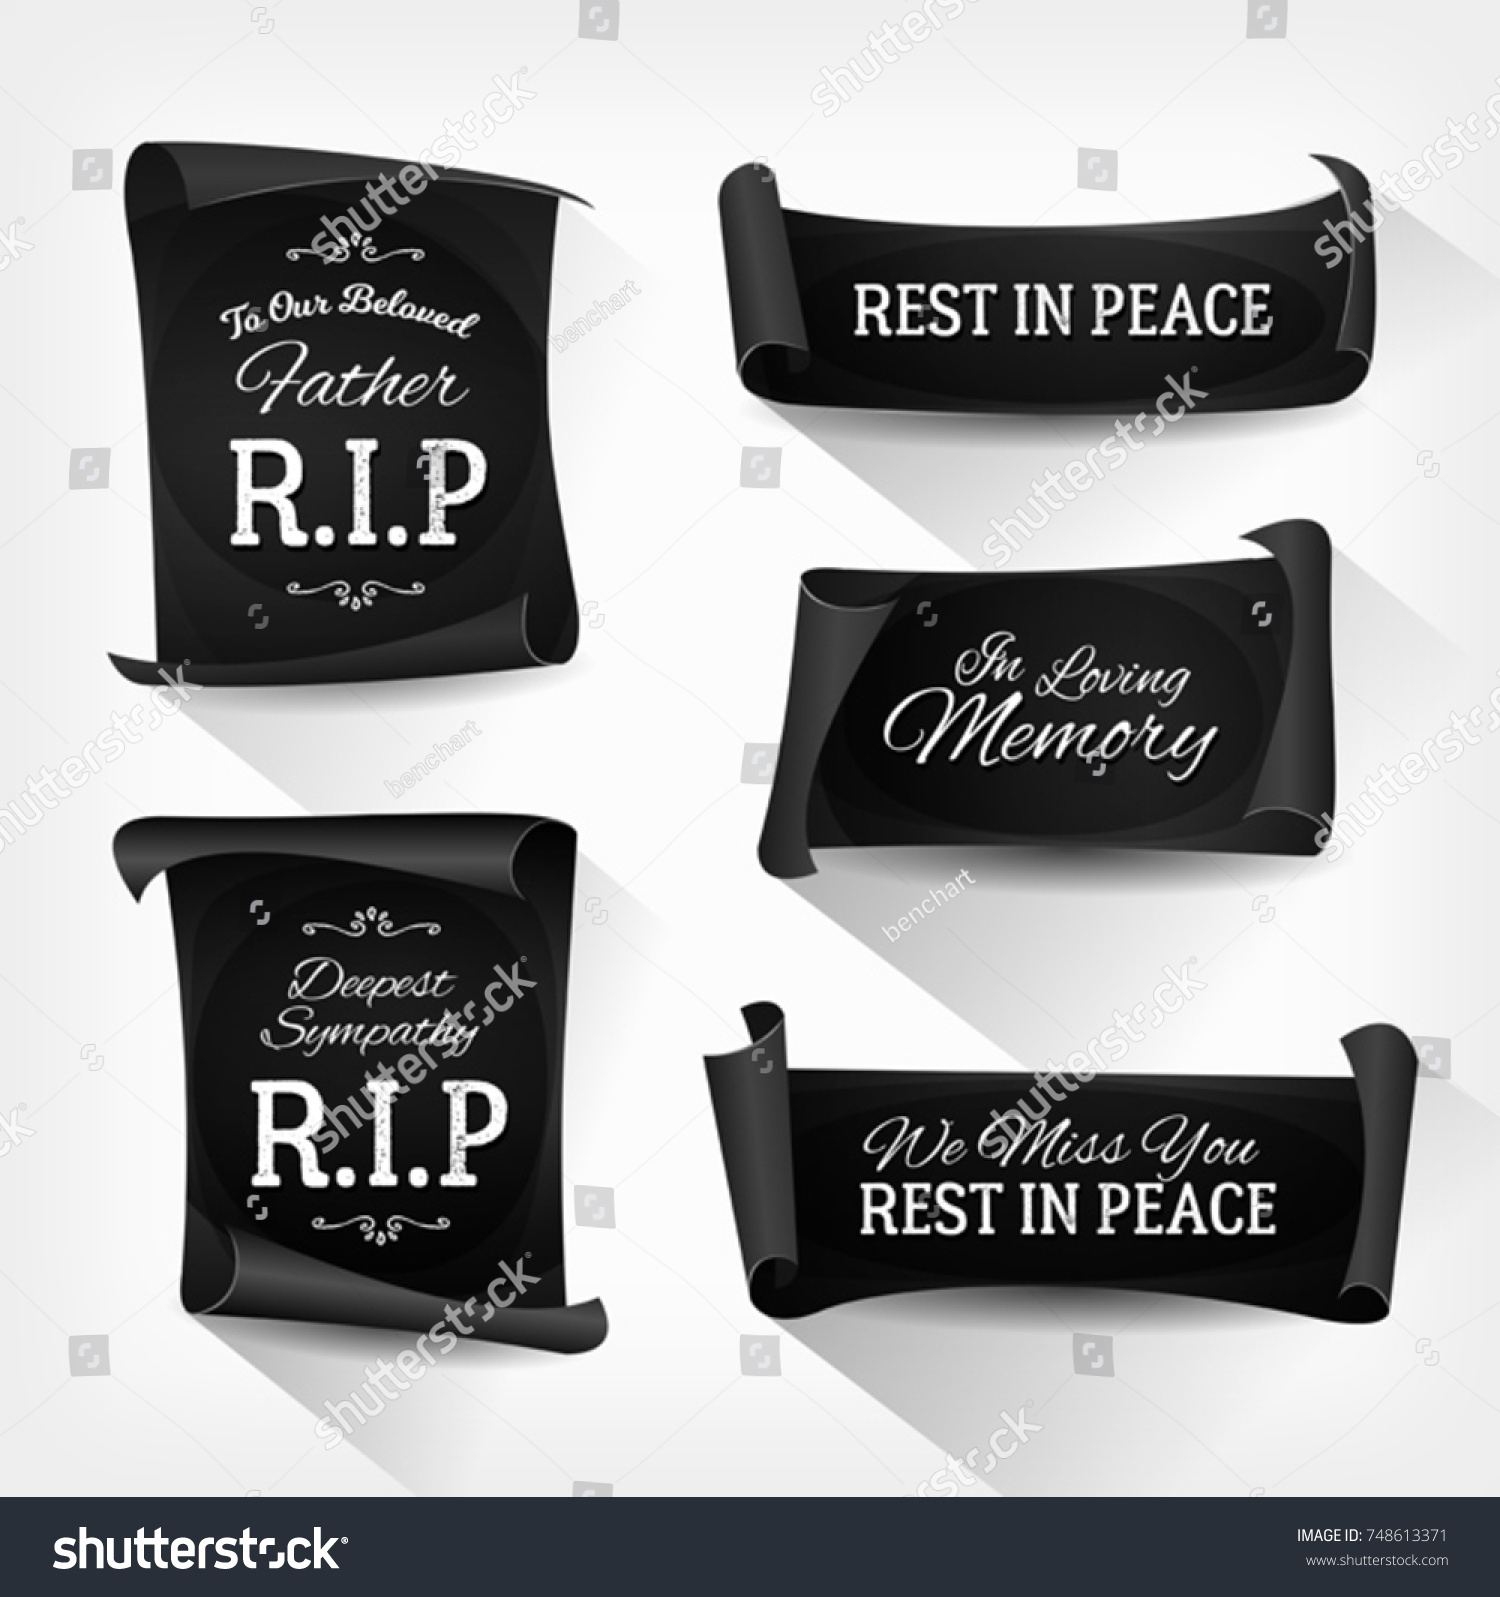 Funeral Rest Peace Banners Illustration Set Stock Image Download Now